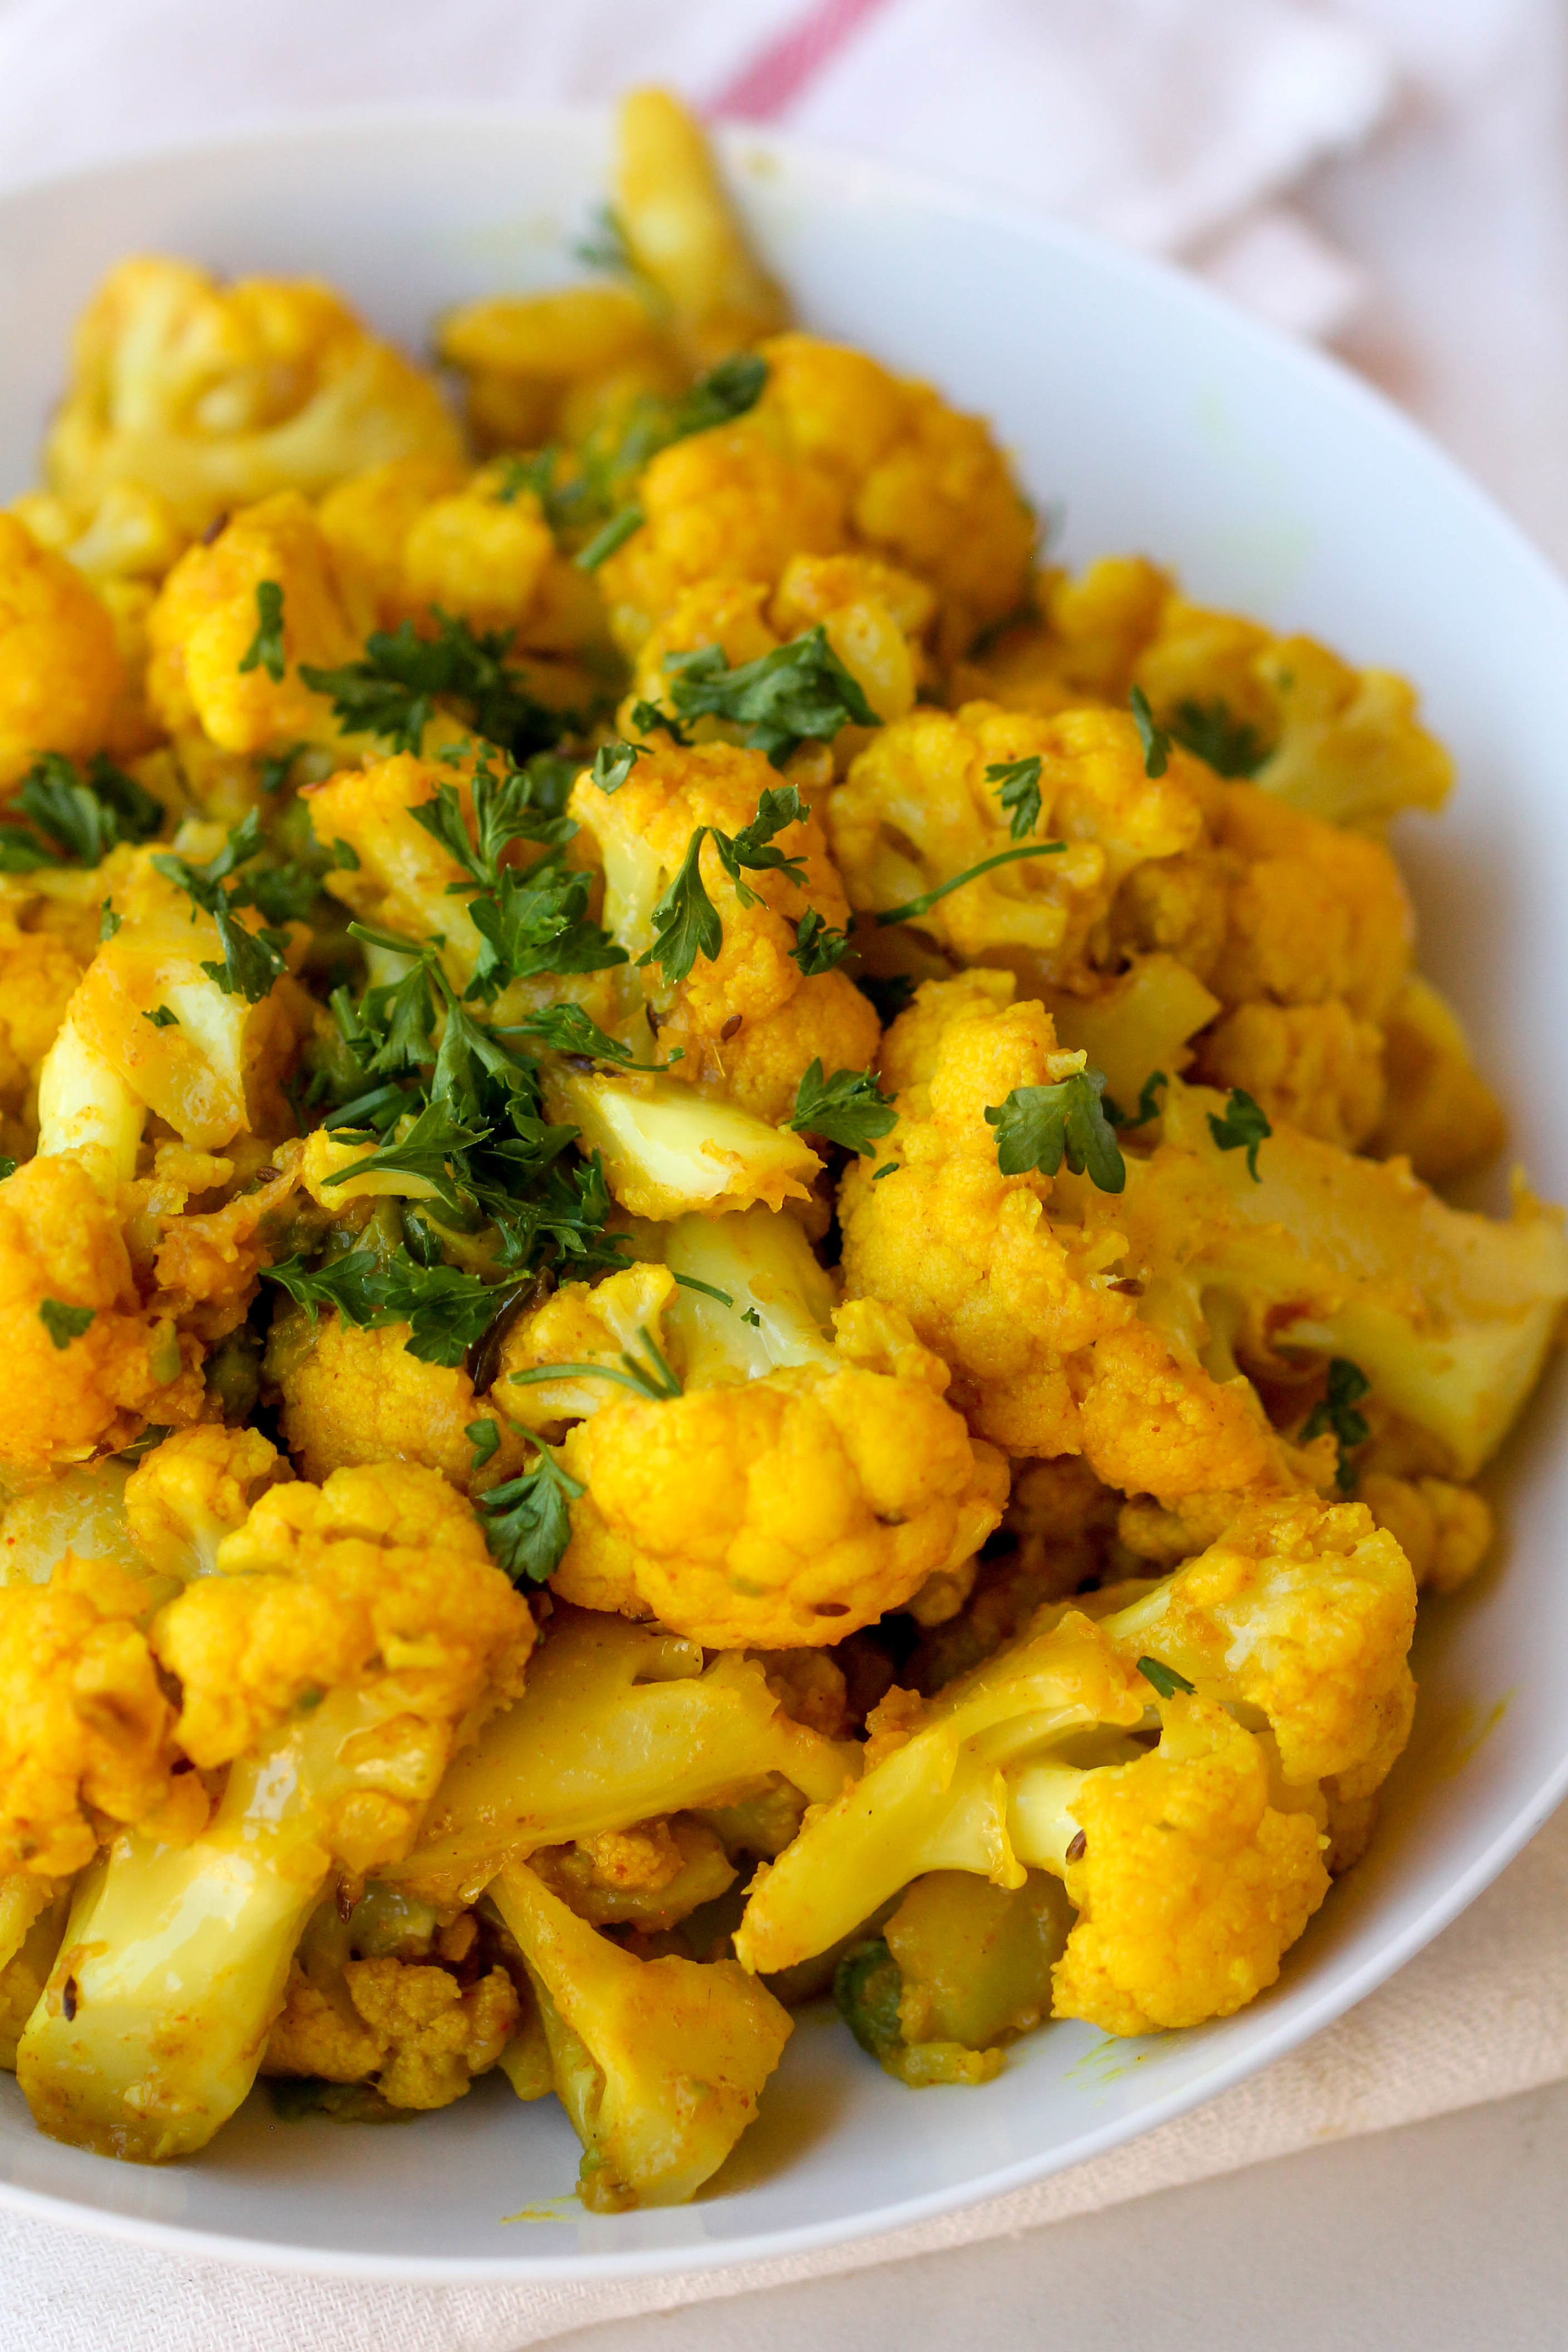 Cauli Aloo is a one pot vegetarian/vegan/gluten-free side dish that can be made under 30 minutes.